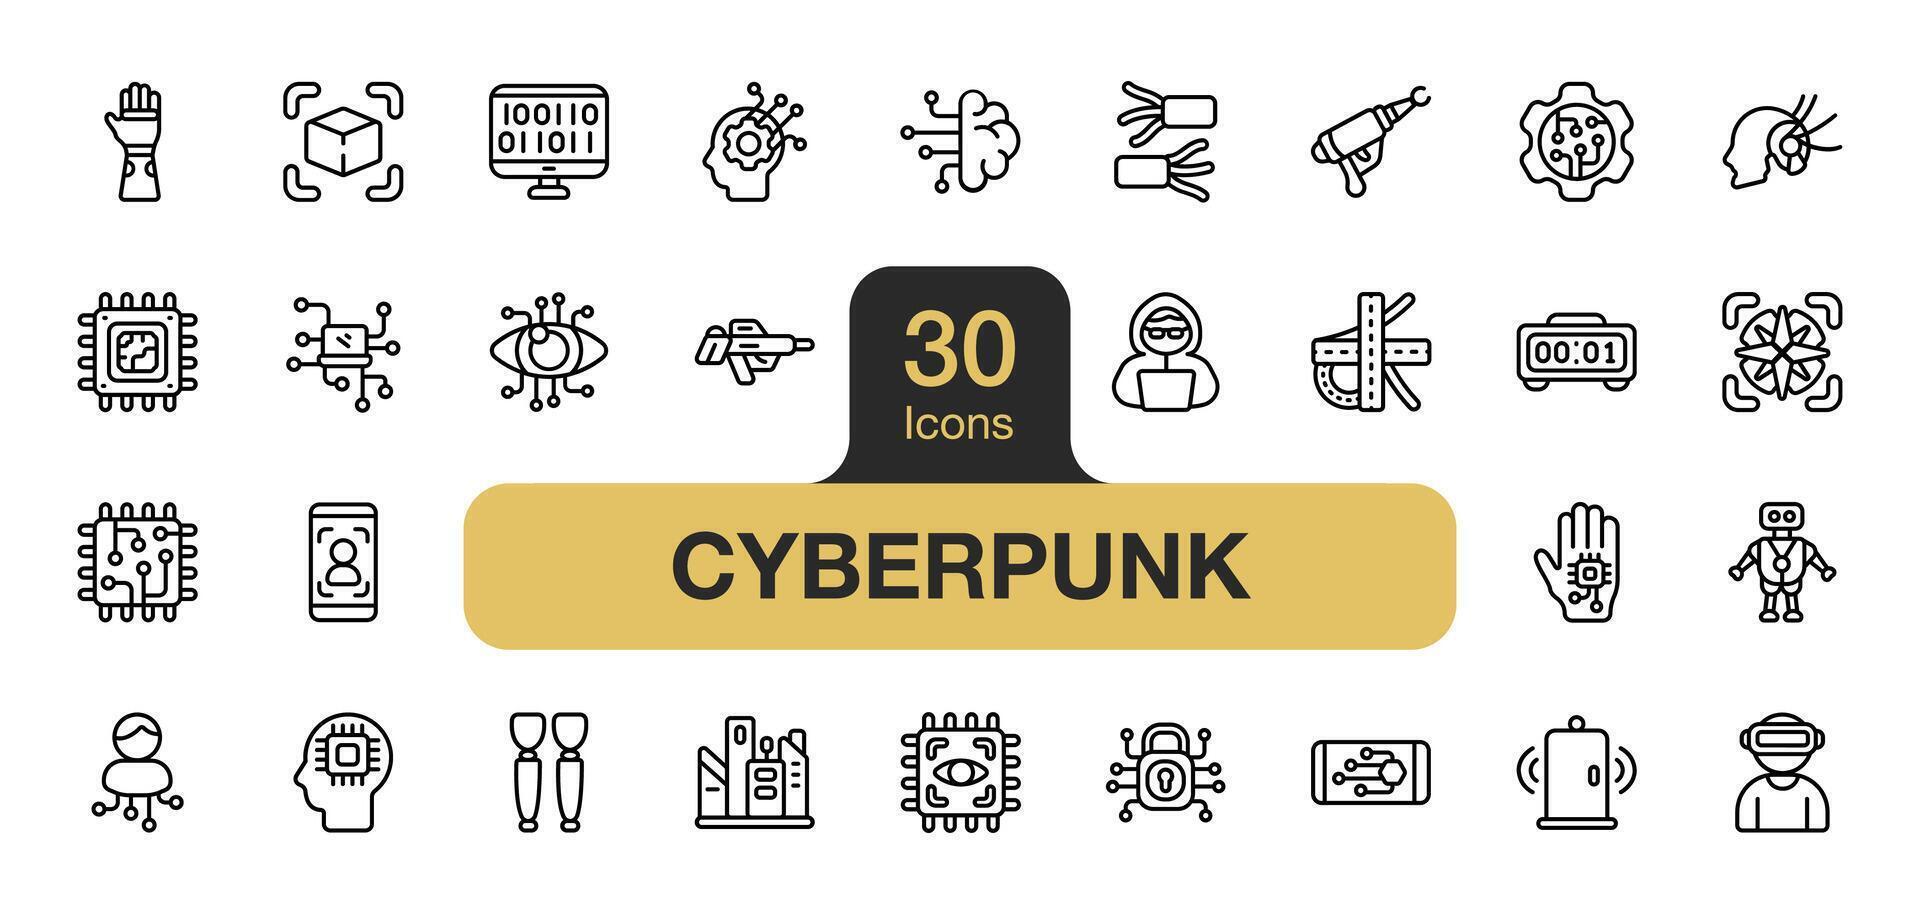 Set of 30 Cyberpunk icon element set. Includes hacker, digital, padlock, futuristic, virtual, computer, and More. Outline icons vector collection.